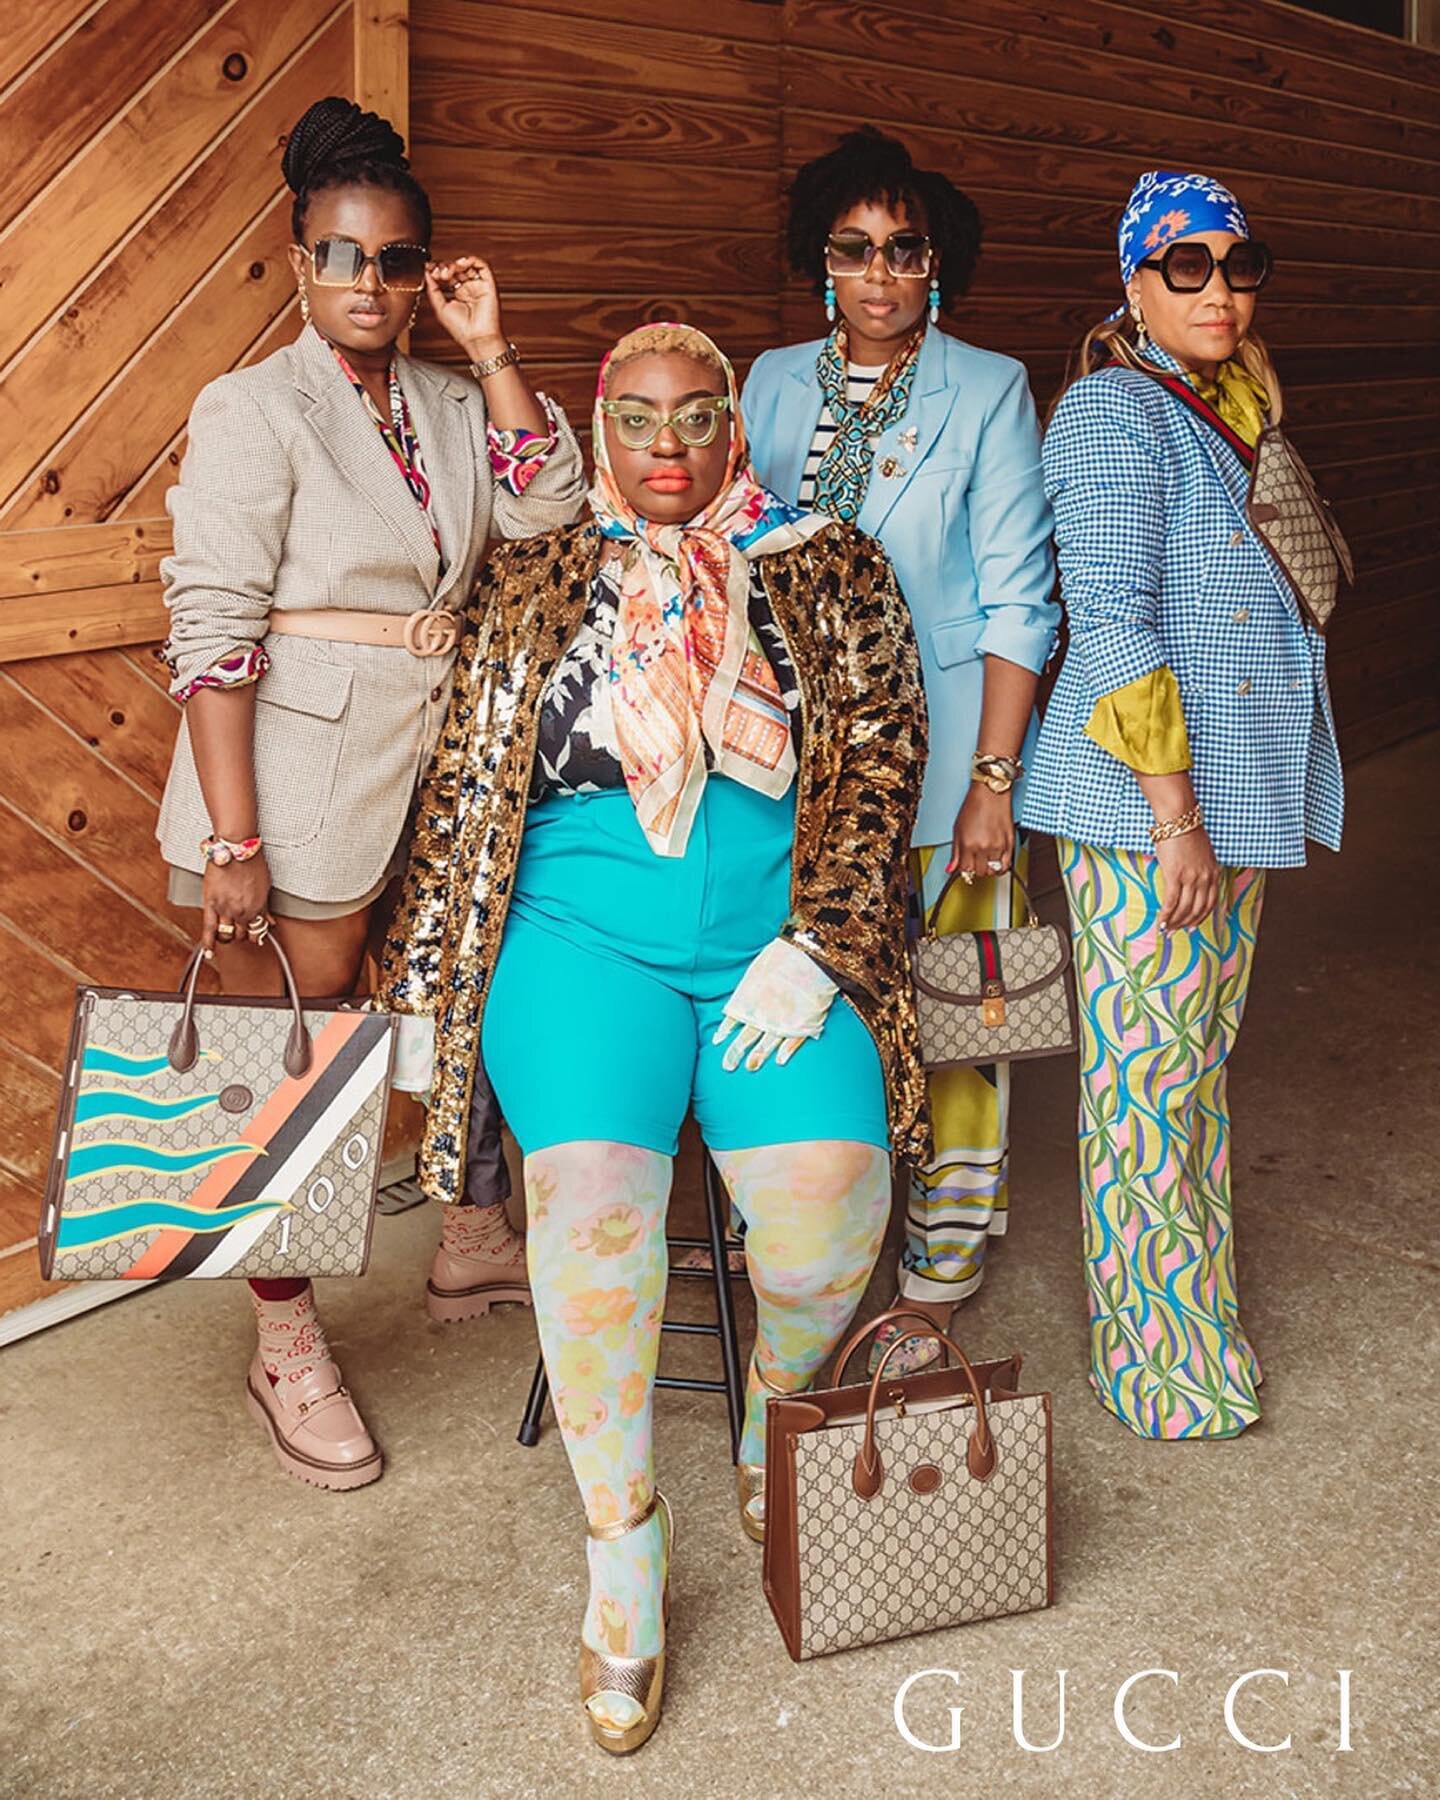 FourSistahsOnly making a bold statement in a selection of looks from the Gucci collection as they were photographed by Justin of Stephanie Kayla Photography at a rural Equestrian Center. Showcasing their own personal style with a mix of vintage blaze